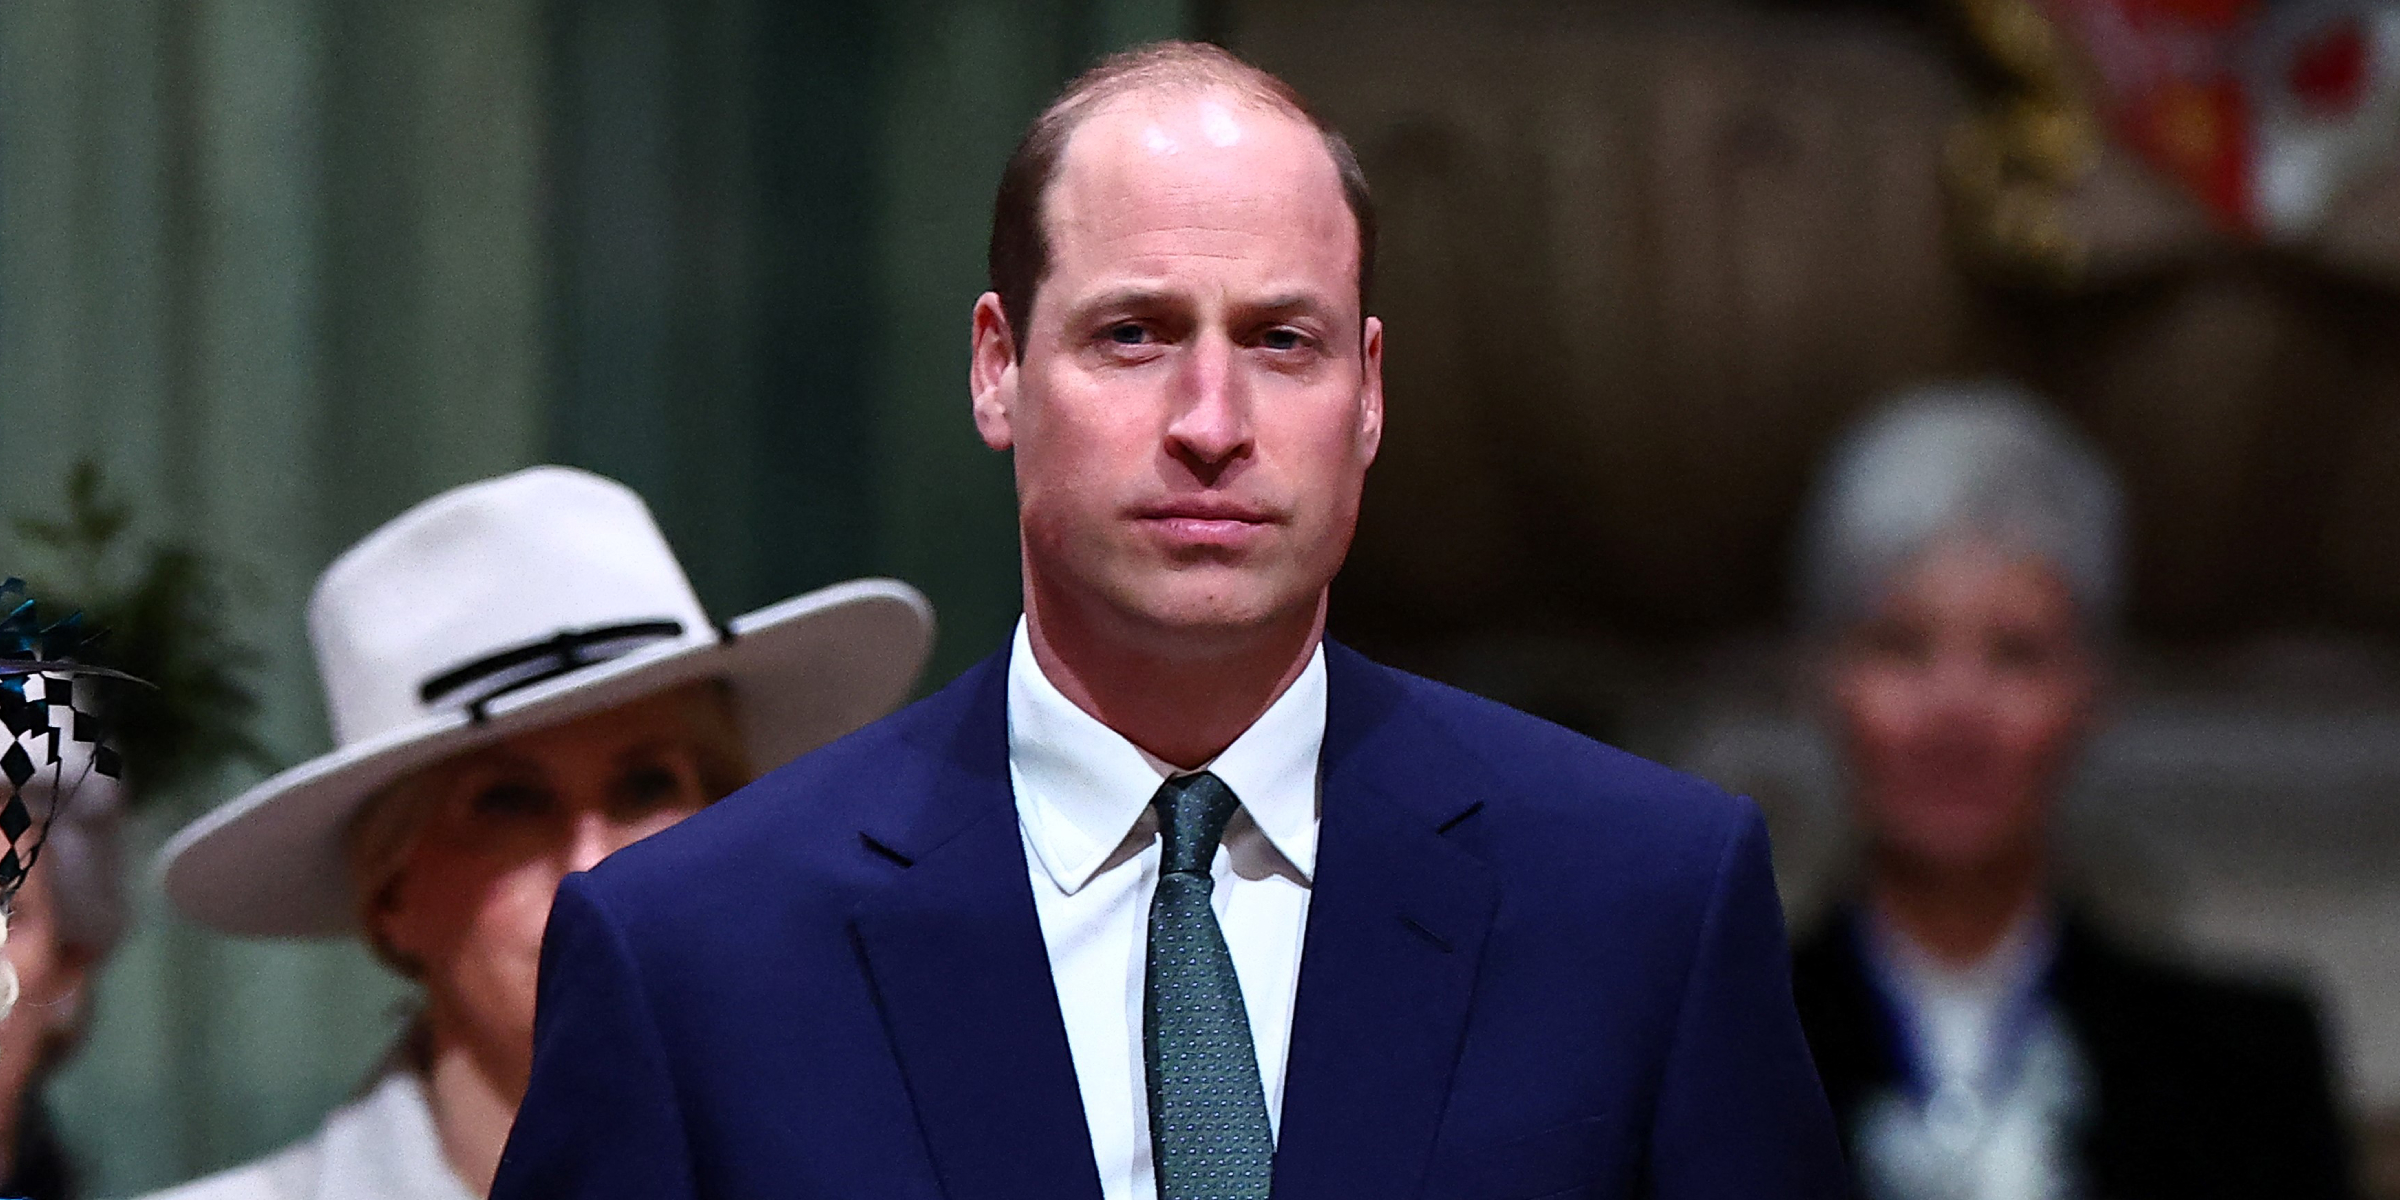 Prince William | Source: Getty Images